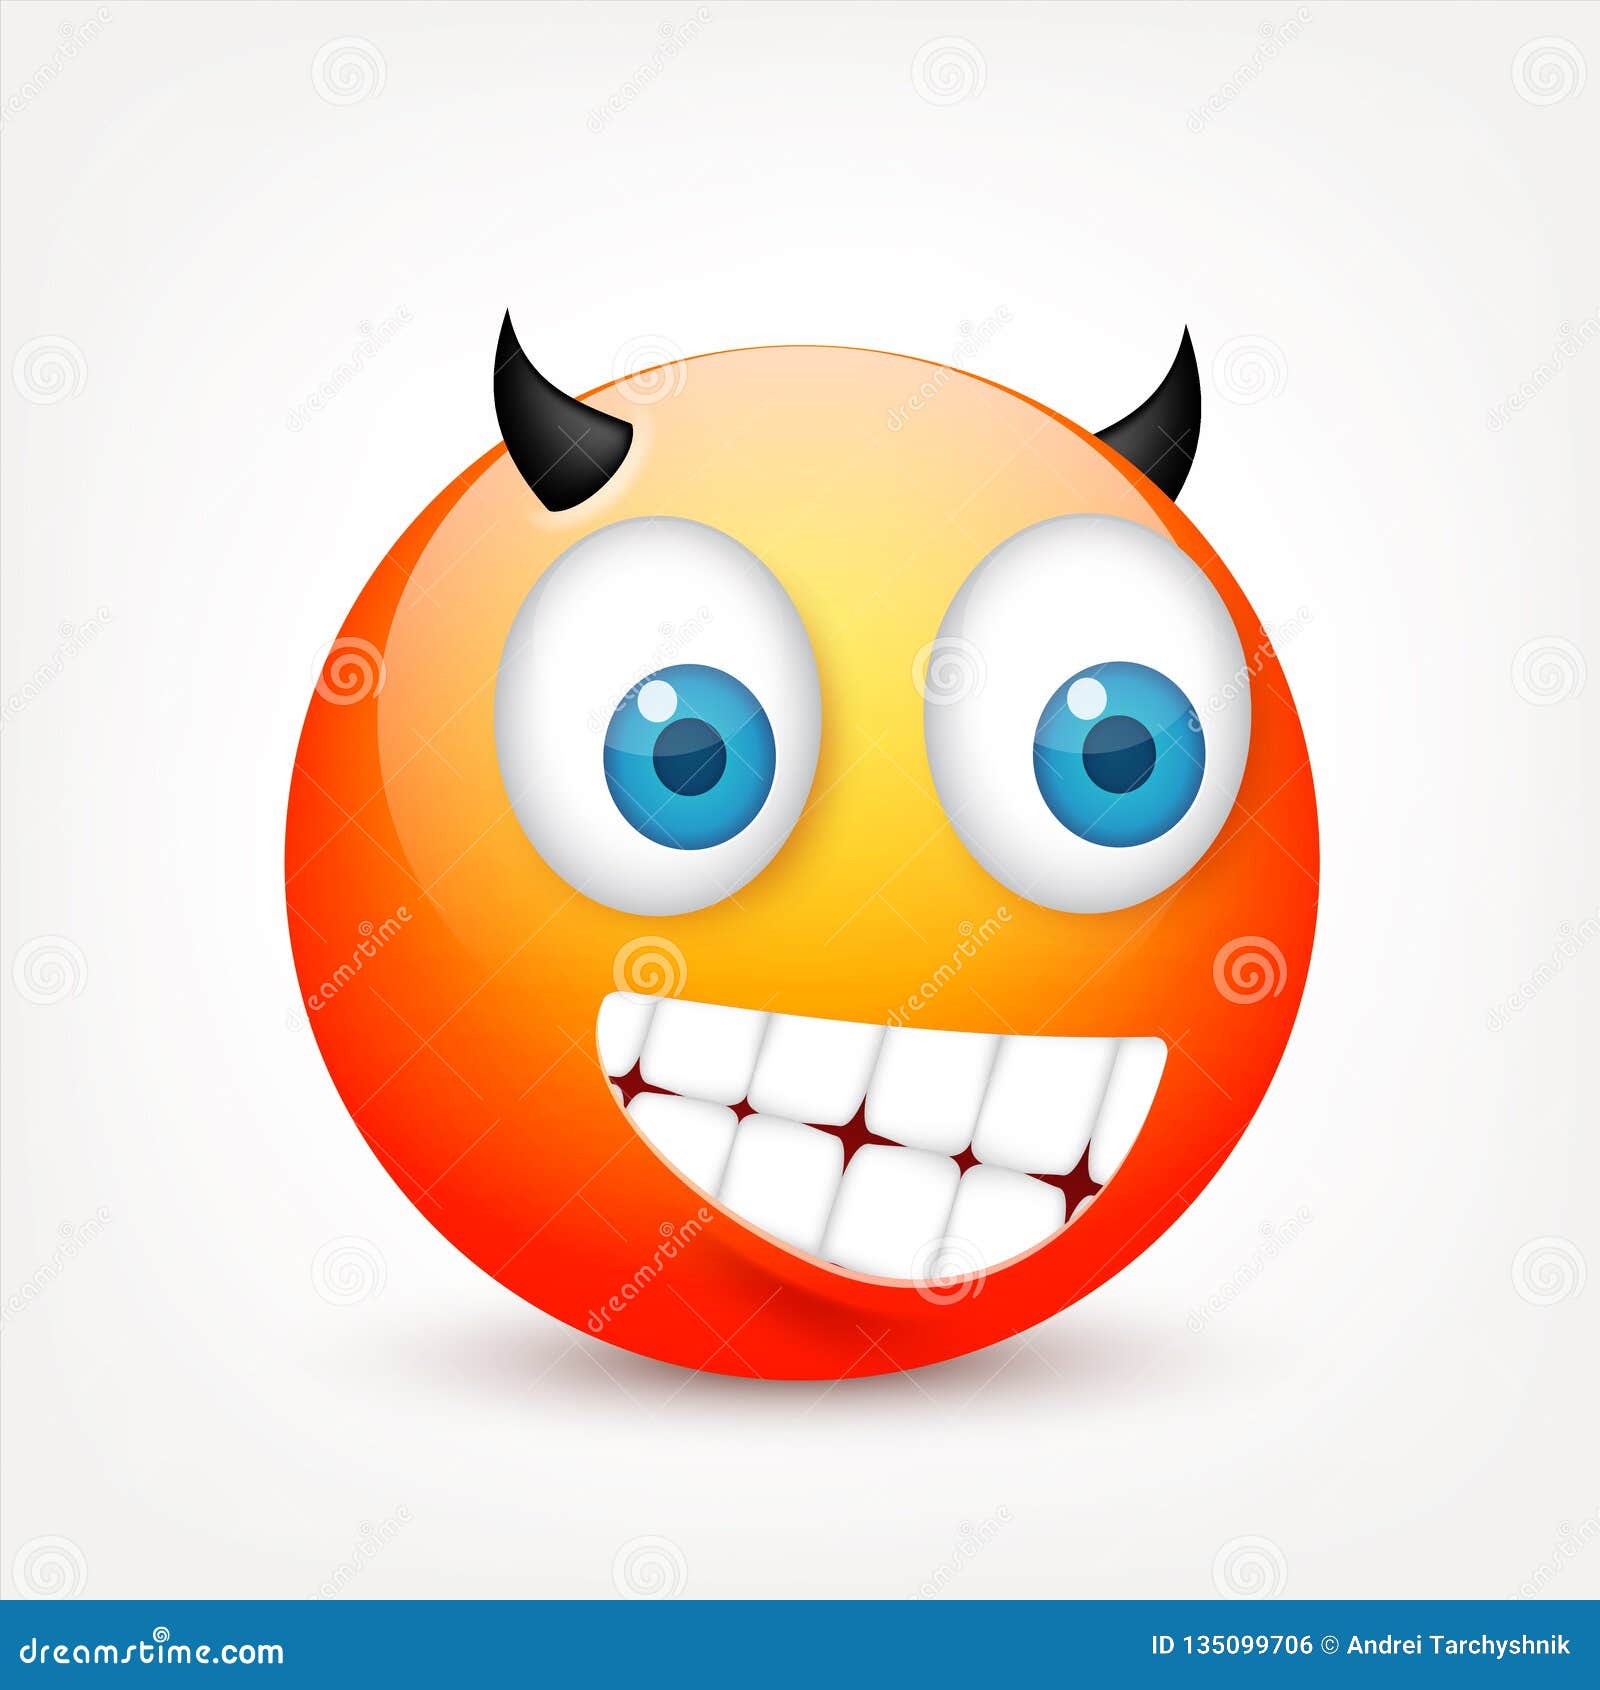 Smiley Red Face With Emotions Realistic Emoji Sad Or Happy Angry Emoticon Mood Cartoon Character Vector Illustration Stock Vector Illustration Of Comic Emoji